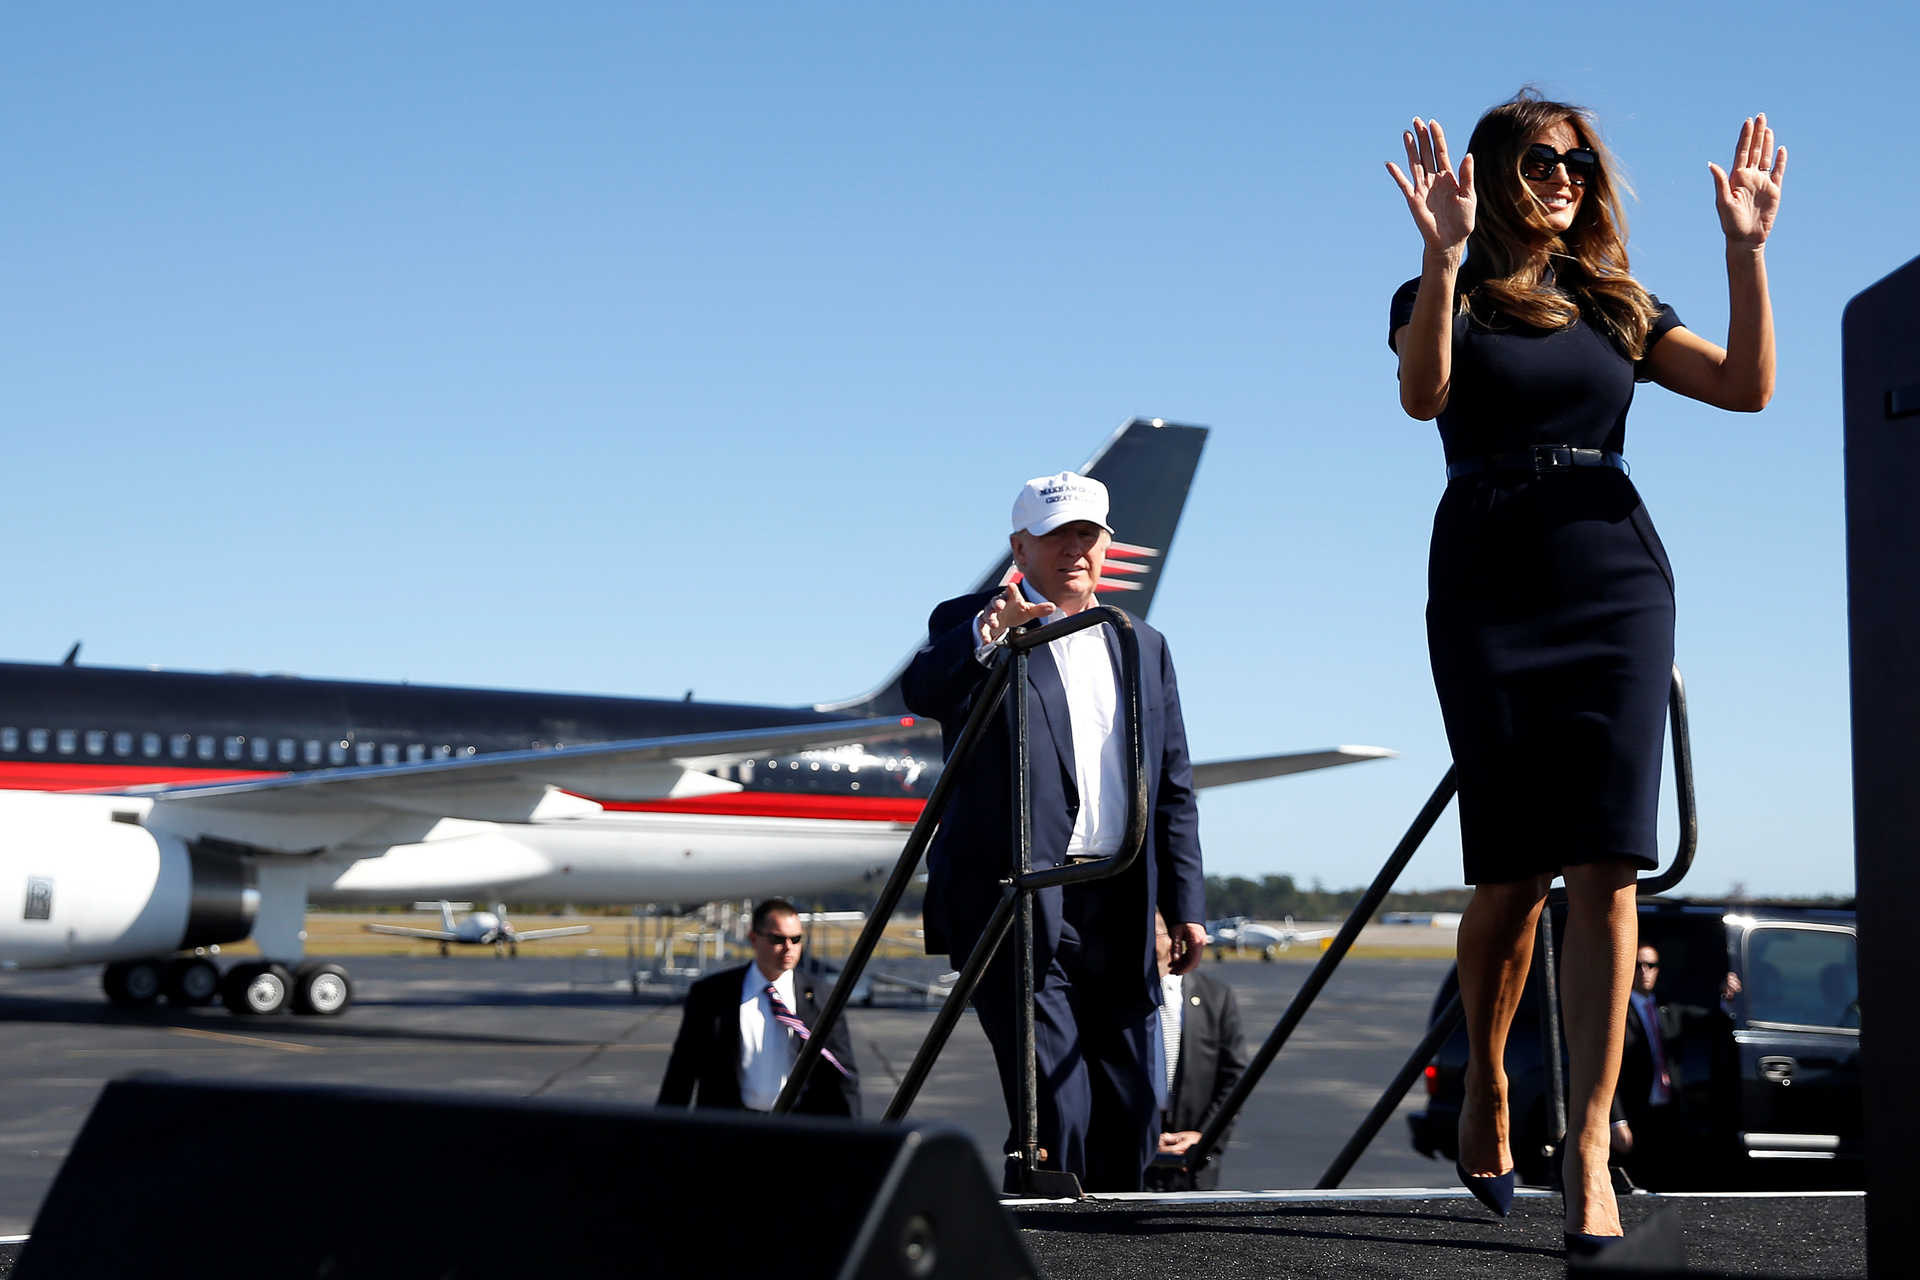 Republican presidential nominee Donald Trump and his wife Melania Trump attend a campaign rally in Wilmington